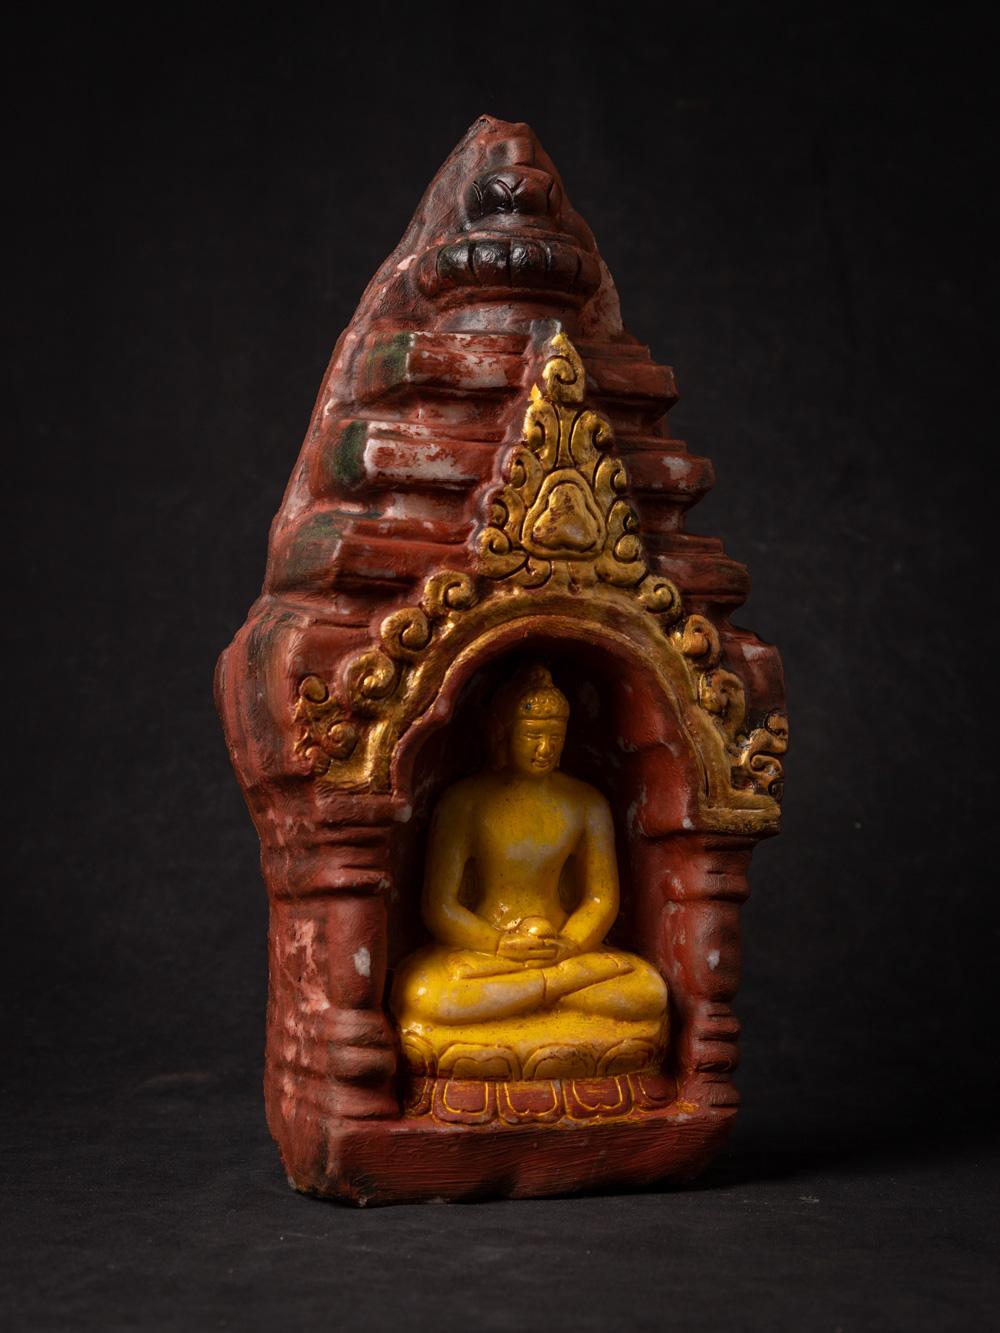 Marble Buddha statue from Thailand
Material : marble
35,8 cm high
18 cm wide and 7,5 cm deep
Dhyana mudra
Late 20th century
Weight: 6,97 kgs
Originating from Thailand
Nr: 3760-6
